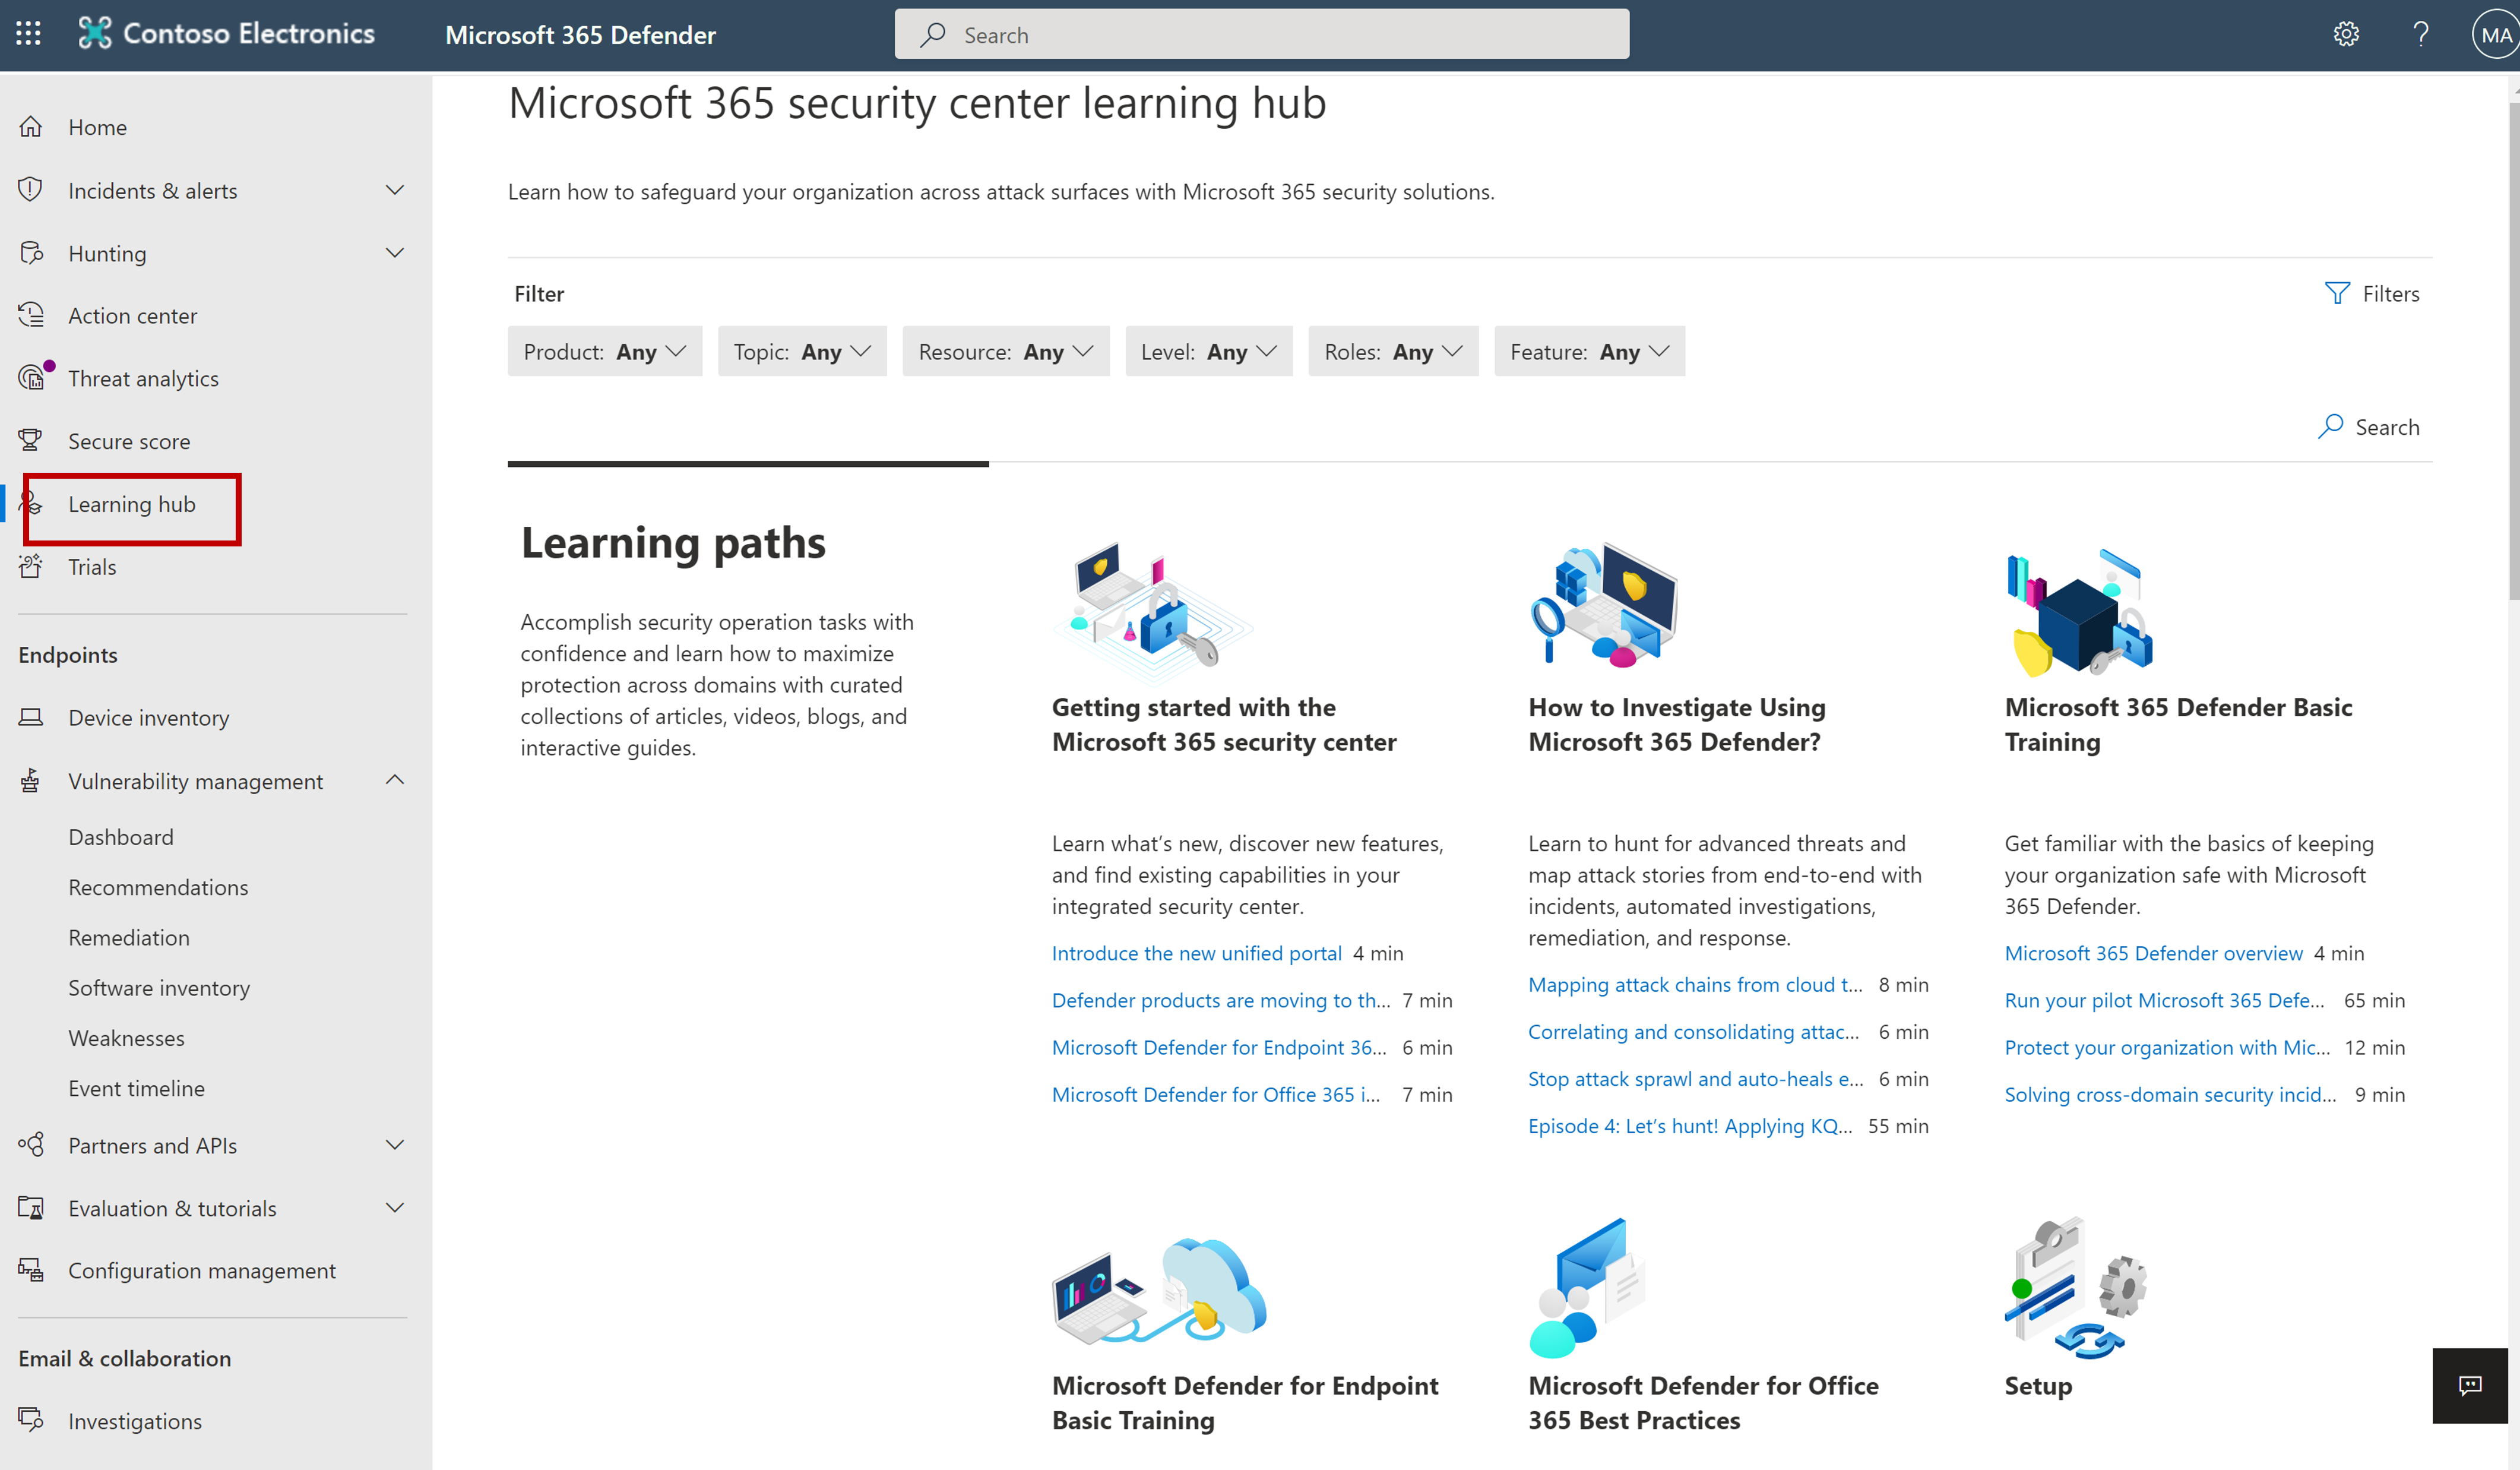 Screenshot showing the learning hub page.